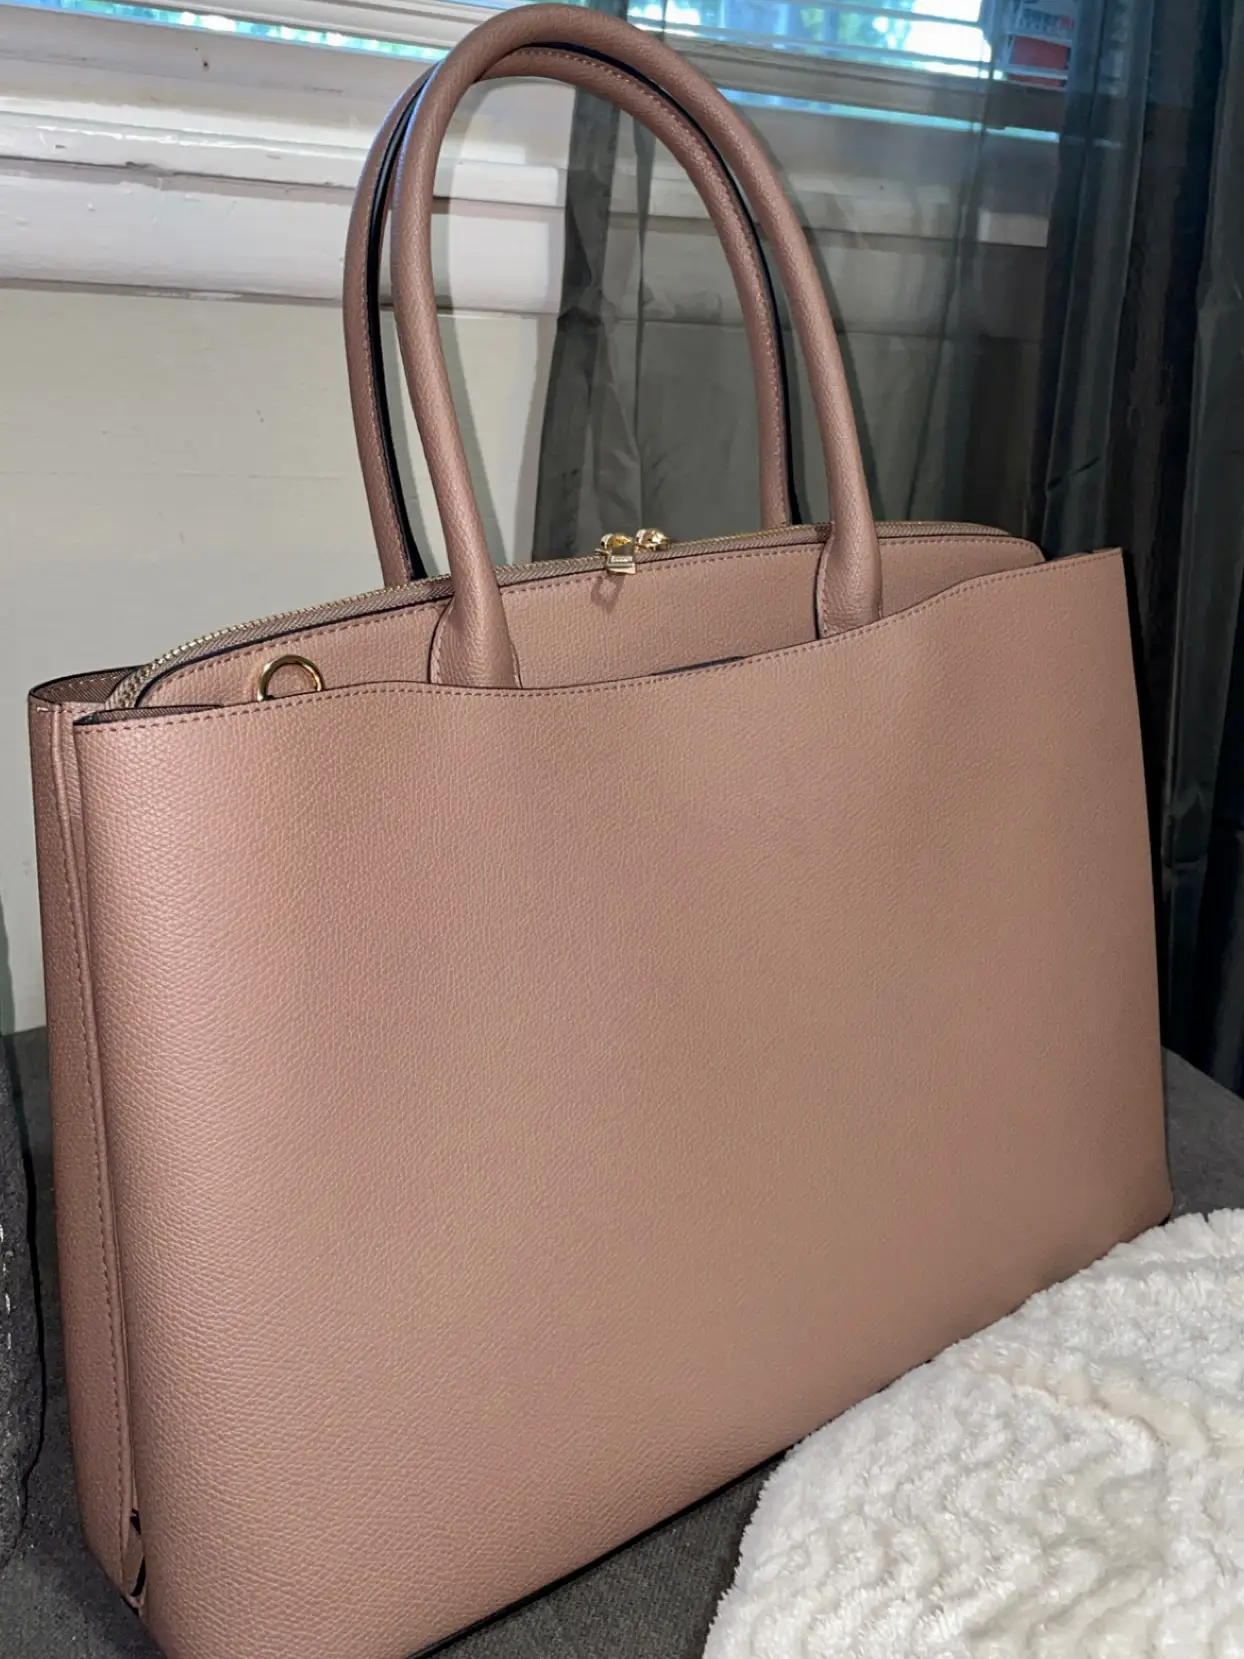 MARSHALLS HANDBAGS and PURSES SHOP WITH ME NEW FINDS! MICHAEL KORS KATE  SPADE COACH 